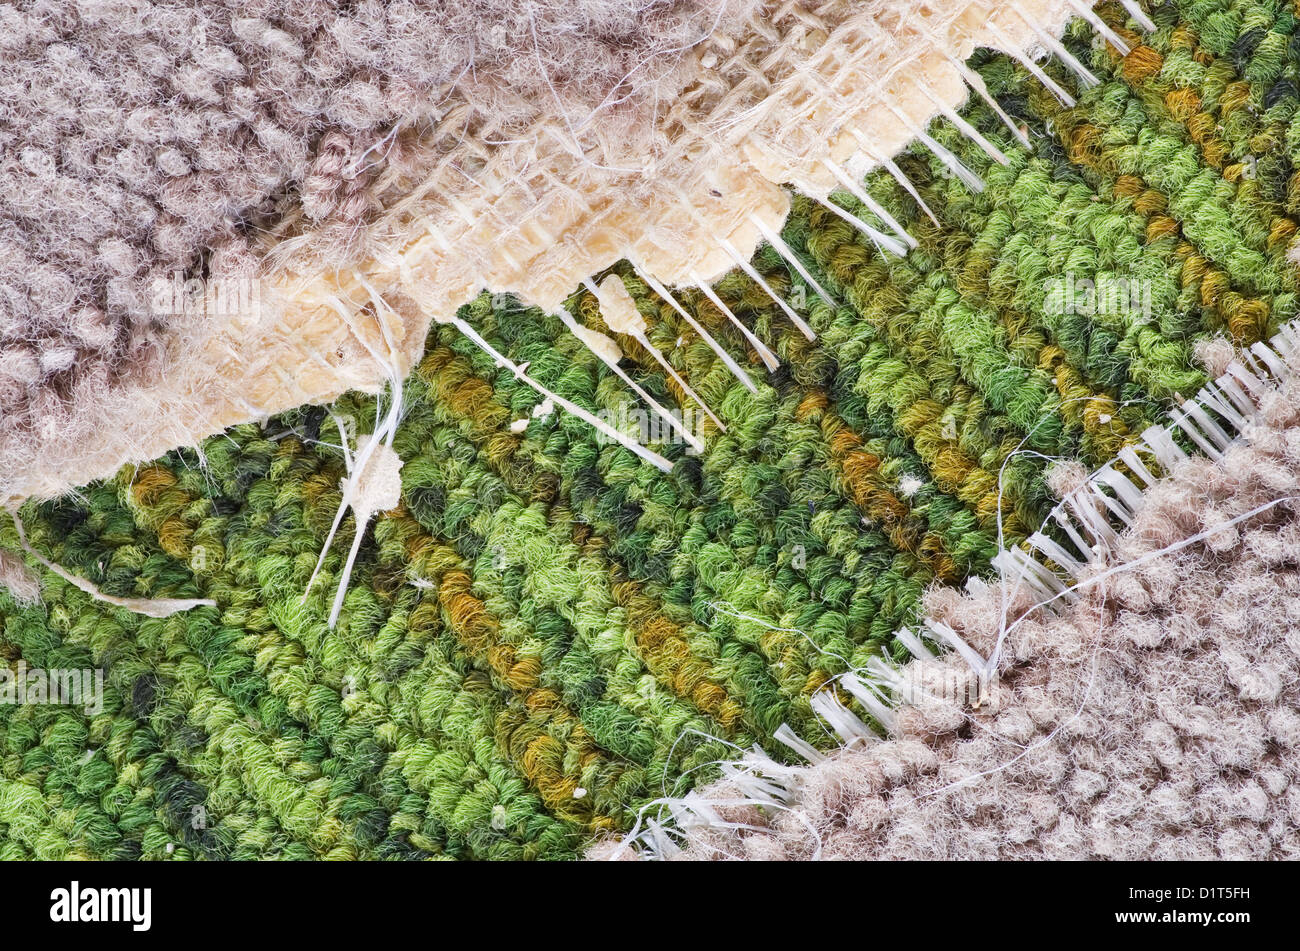 background detail of old ripped tan carpet over green carpet Stock Photo